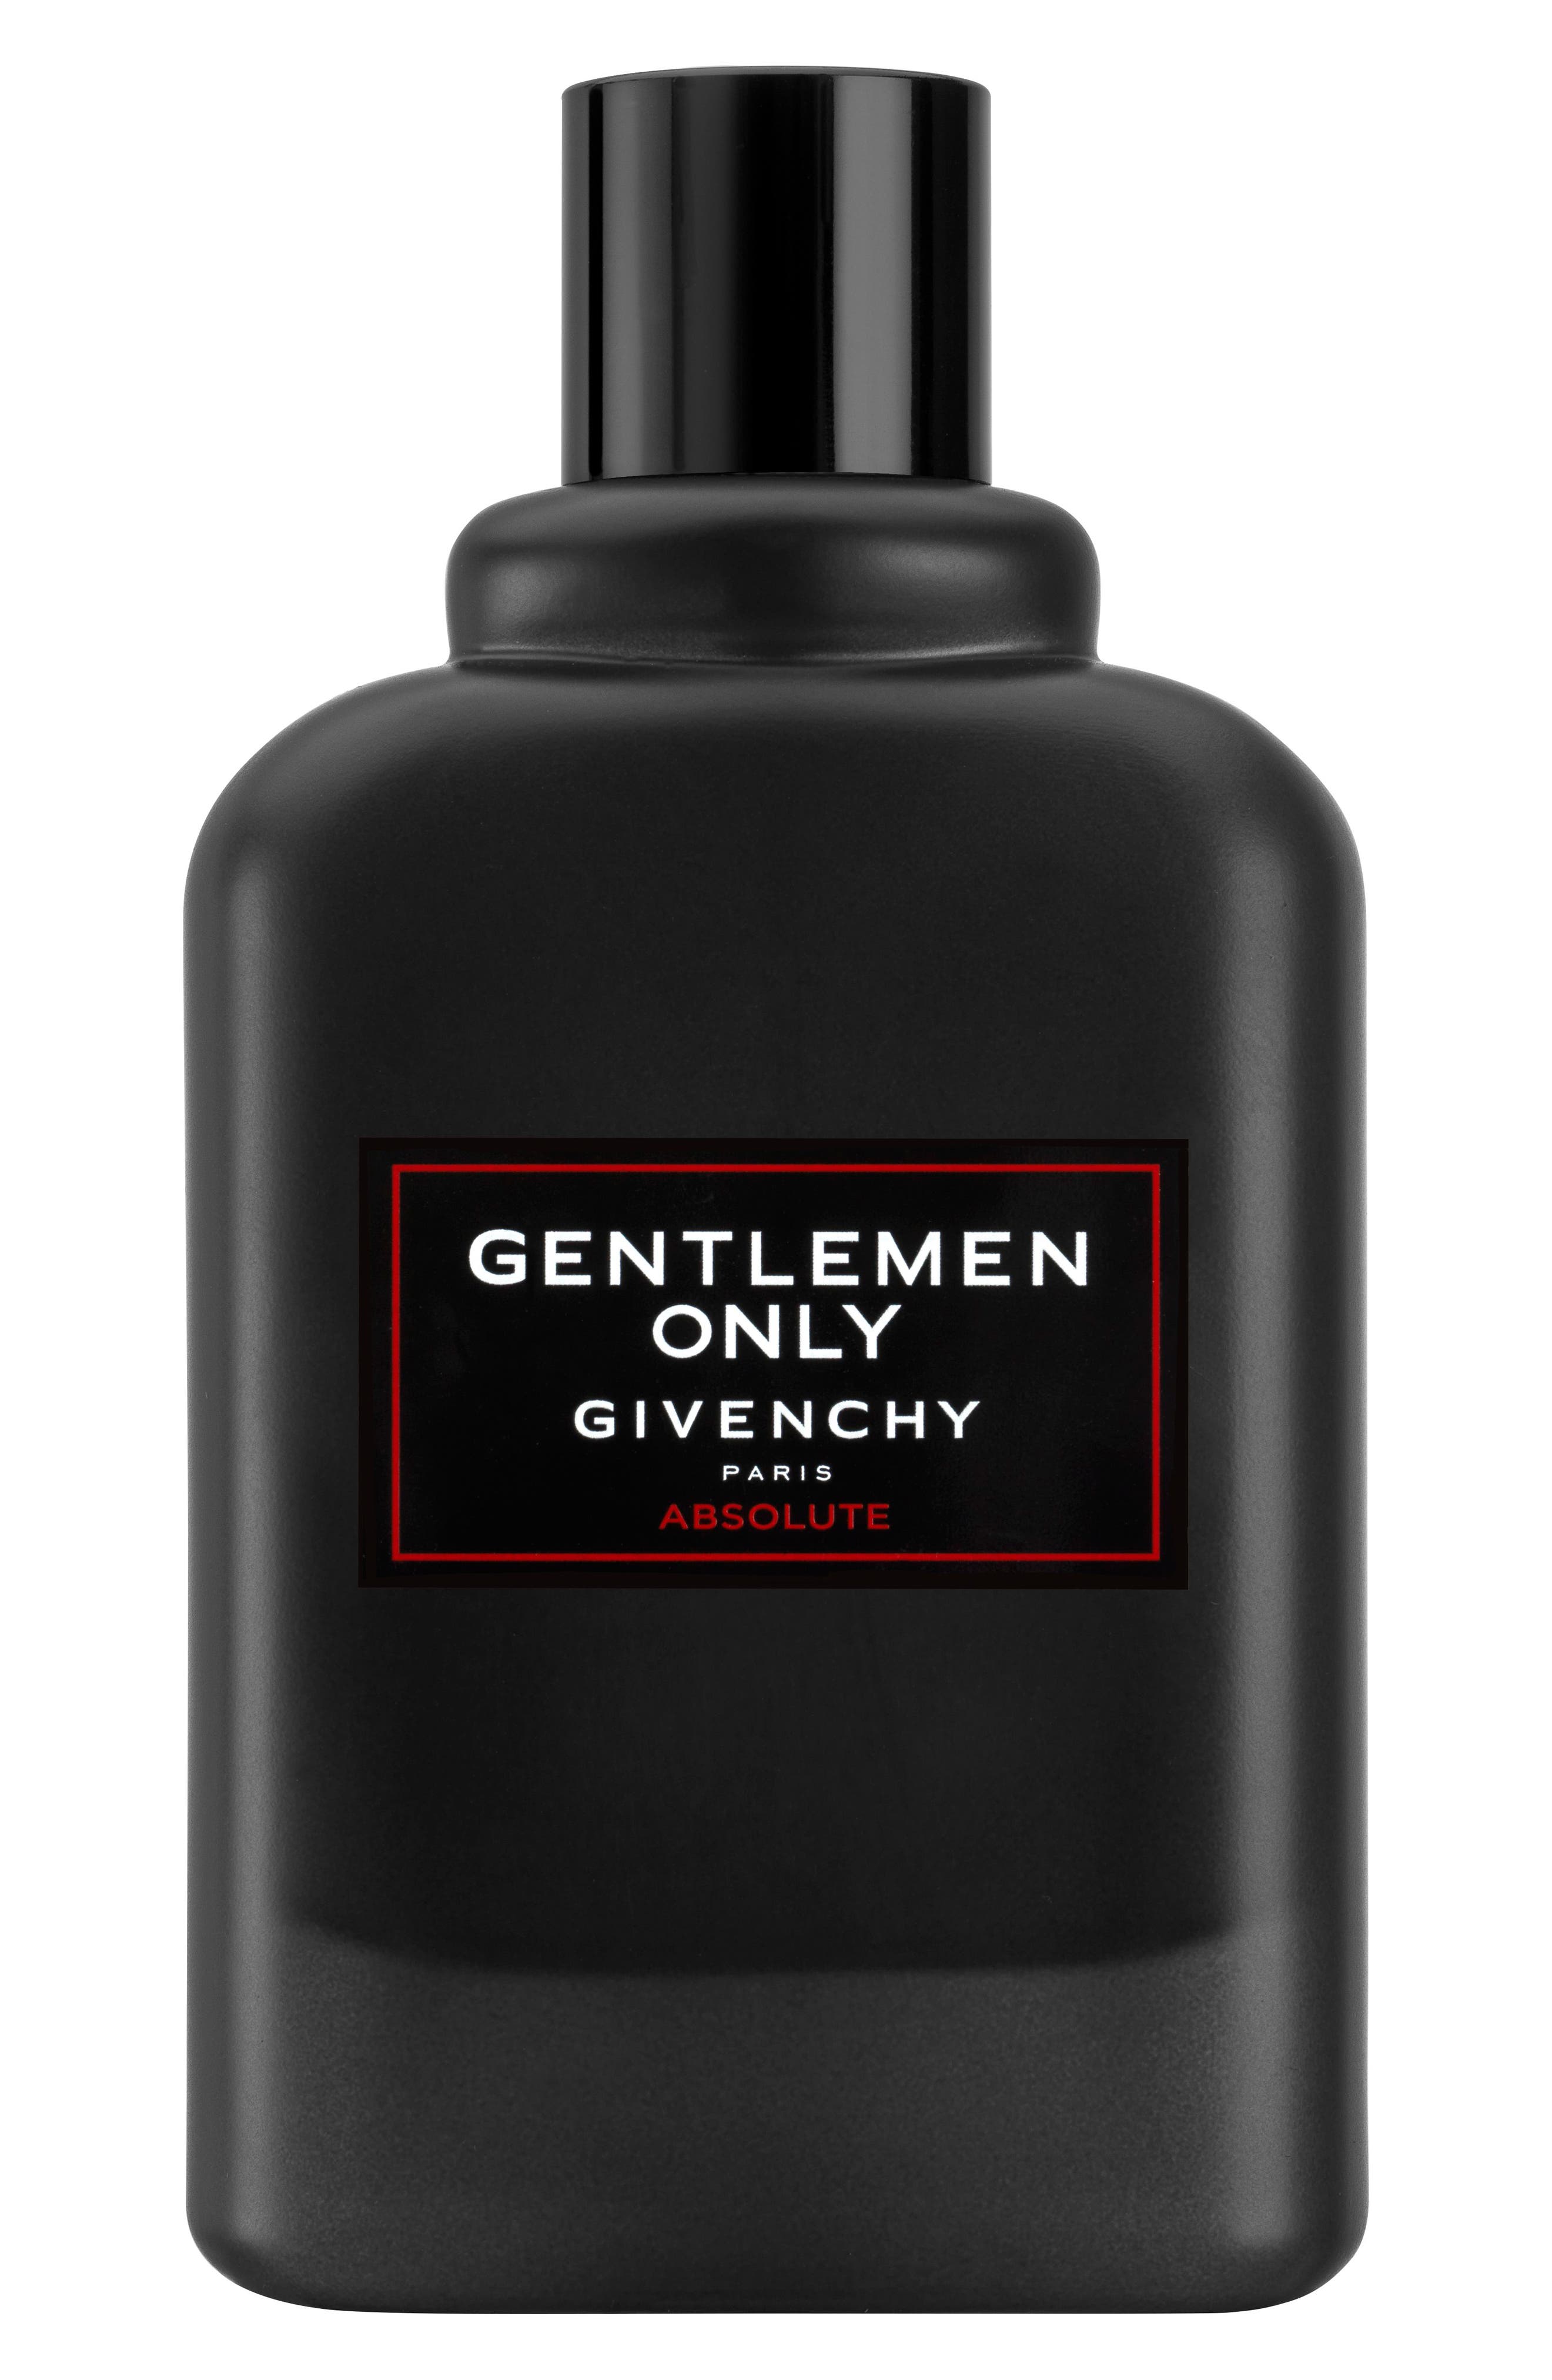 givenchy only absolute 100ml